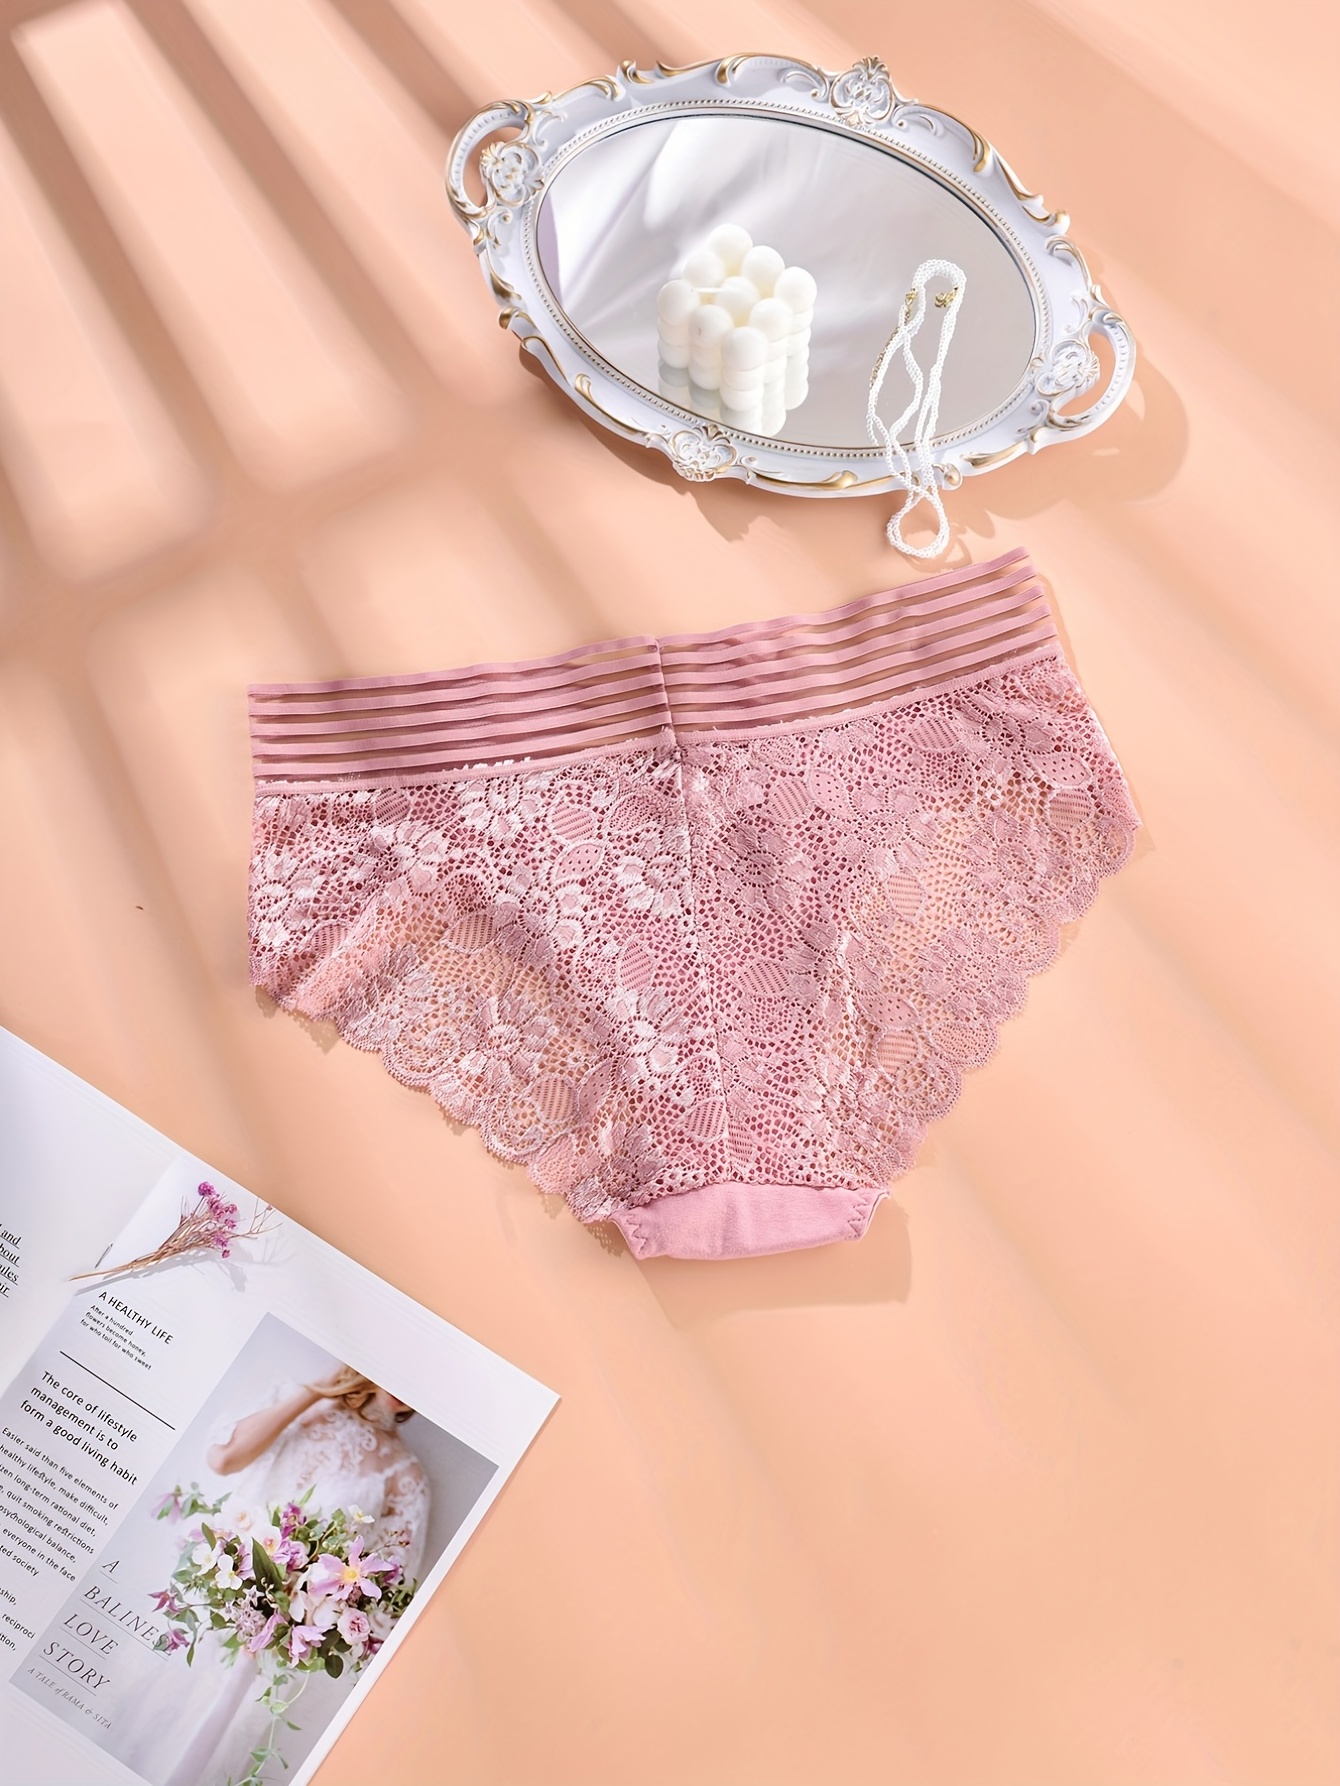 Womens Sexy Underwear Lace Panties High Waisted Plus Size Ladies